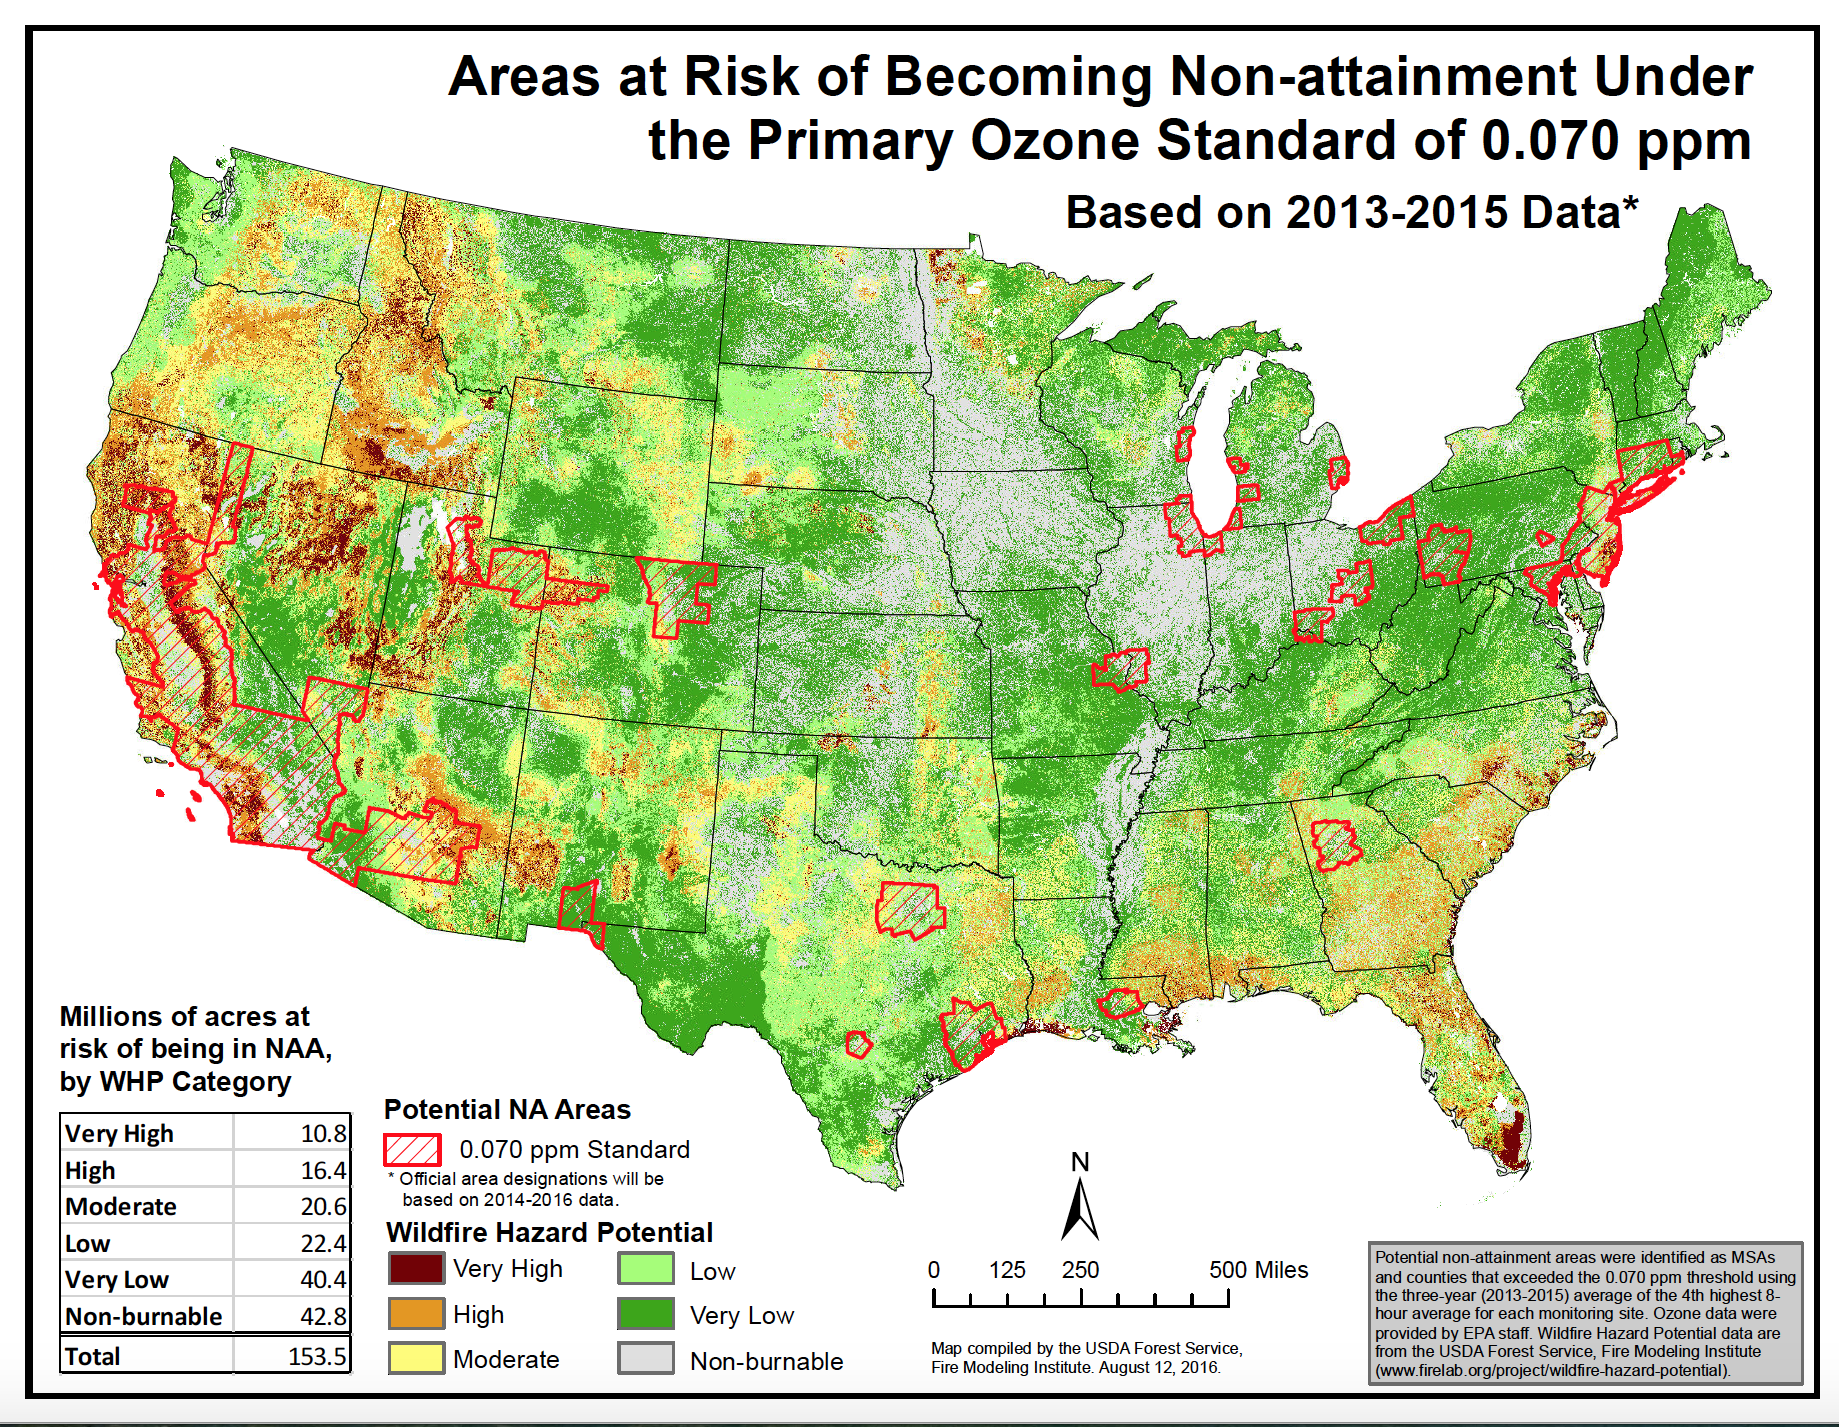 areas at risk of becoming non-attainment under the primary ozone standard of 0.070  ppm.